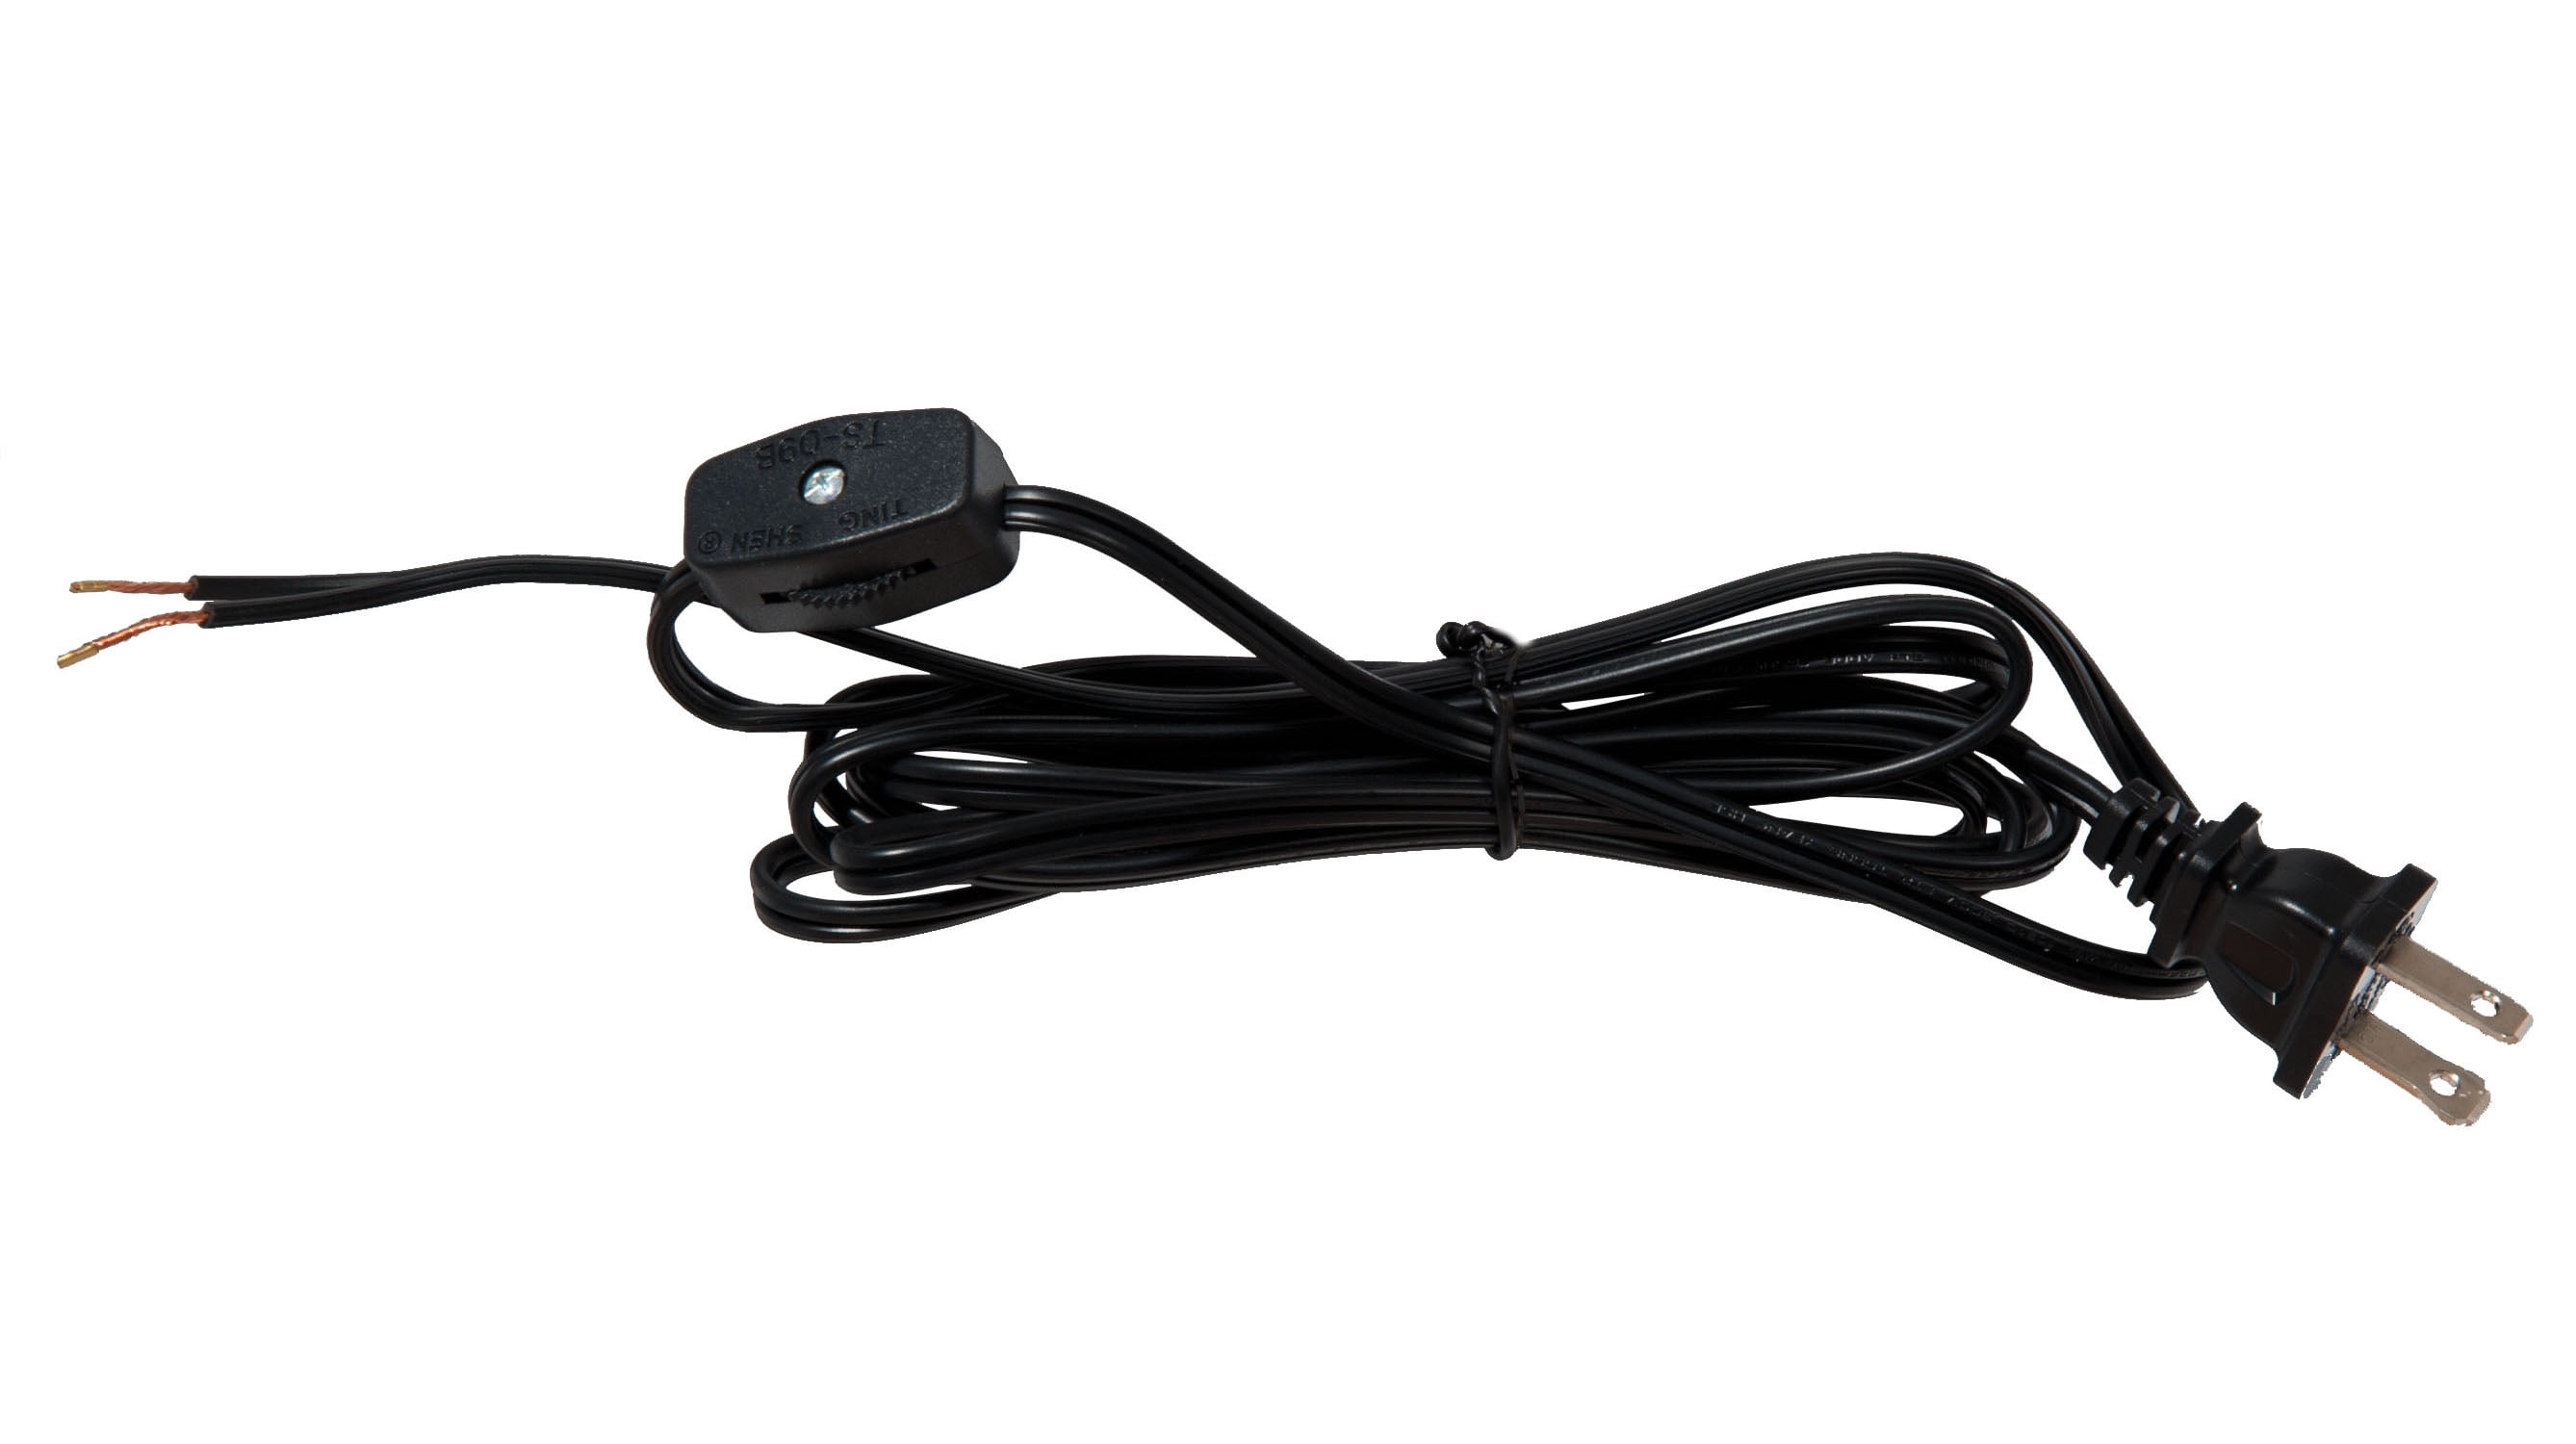 B&P Lamp® 8 Foot Black Cord Set With Inline Rotary On-Off Switch, Spt-1 Cord  Size 